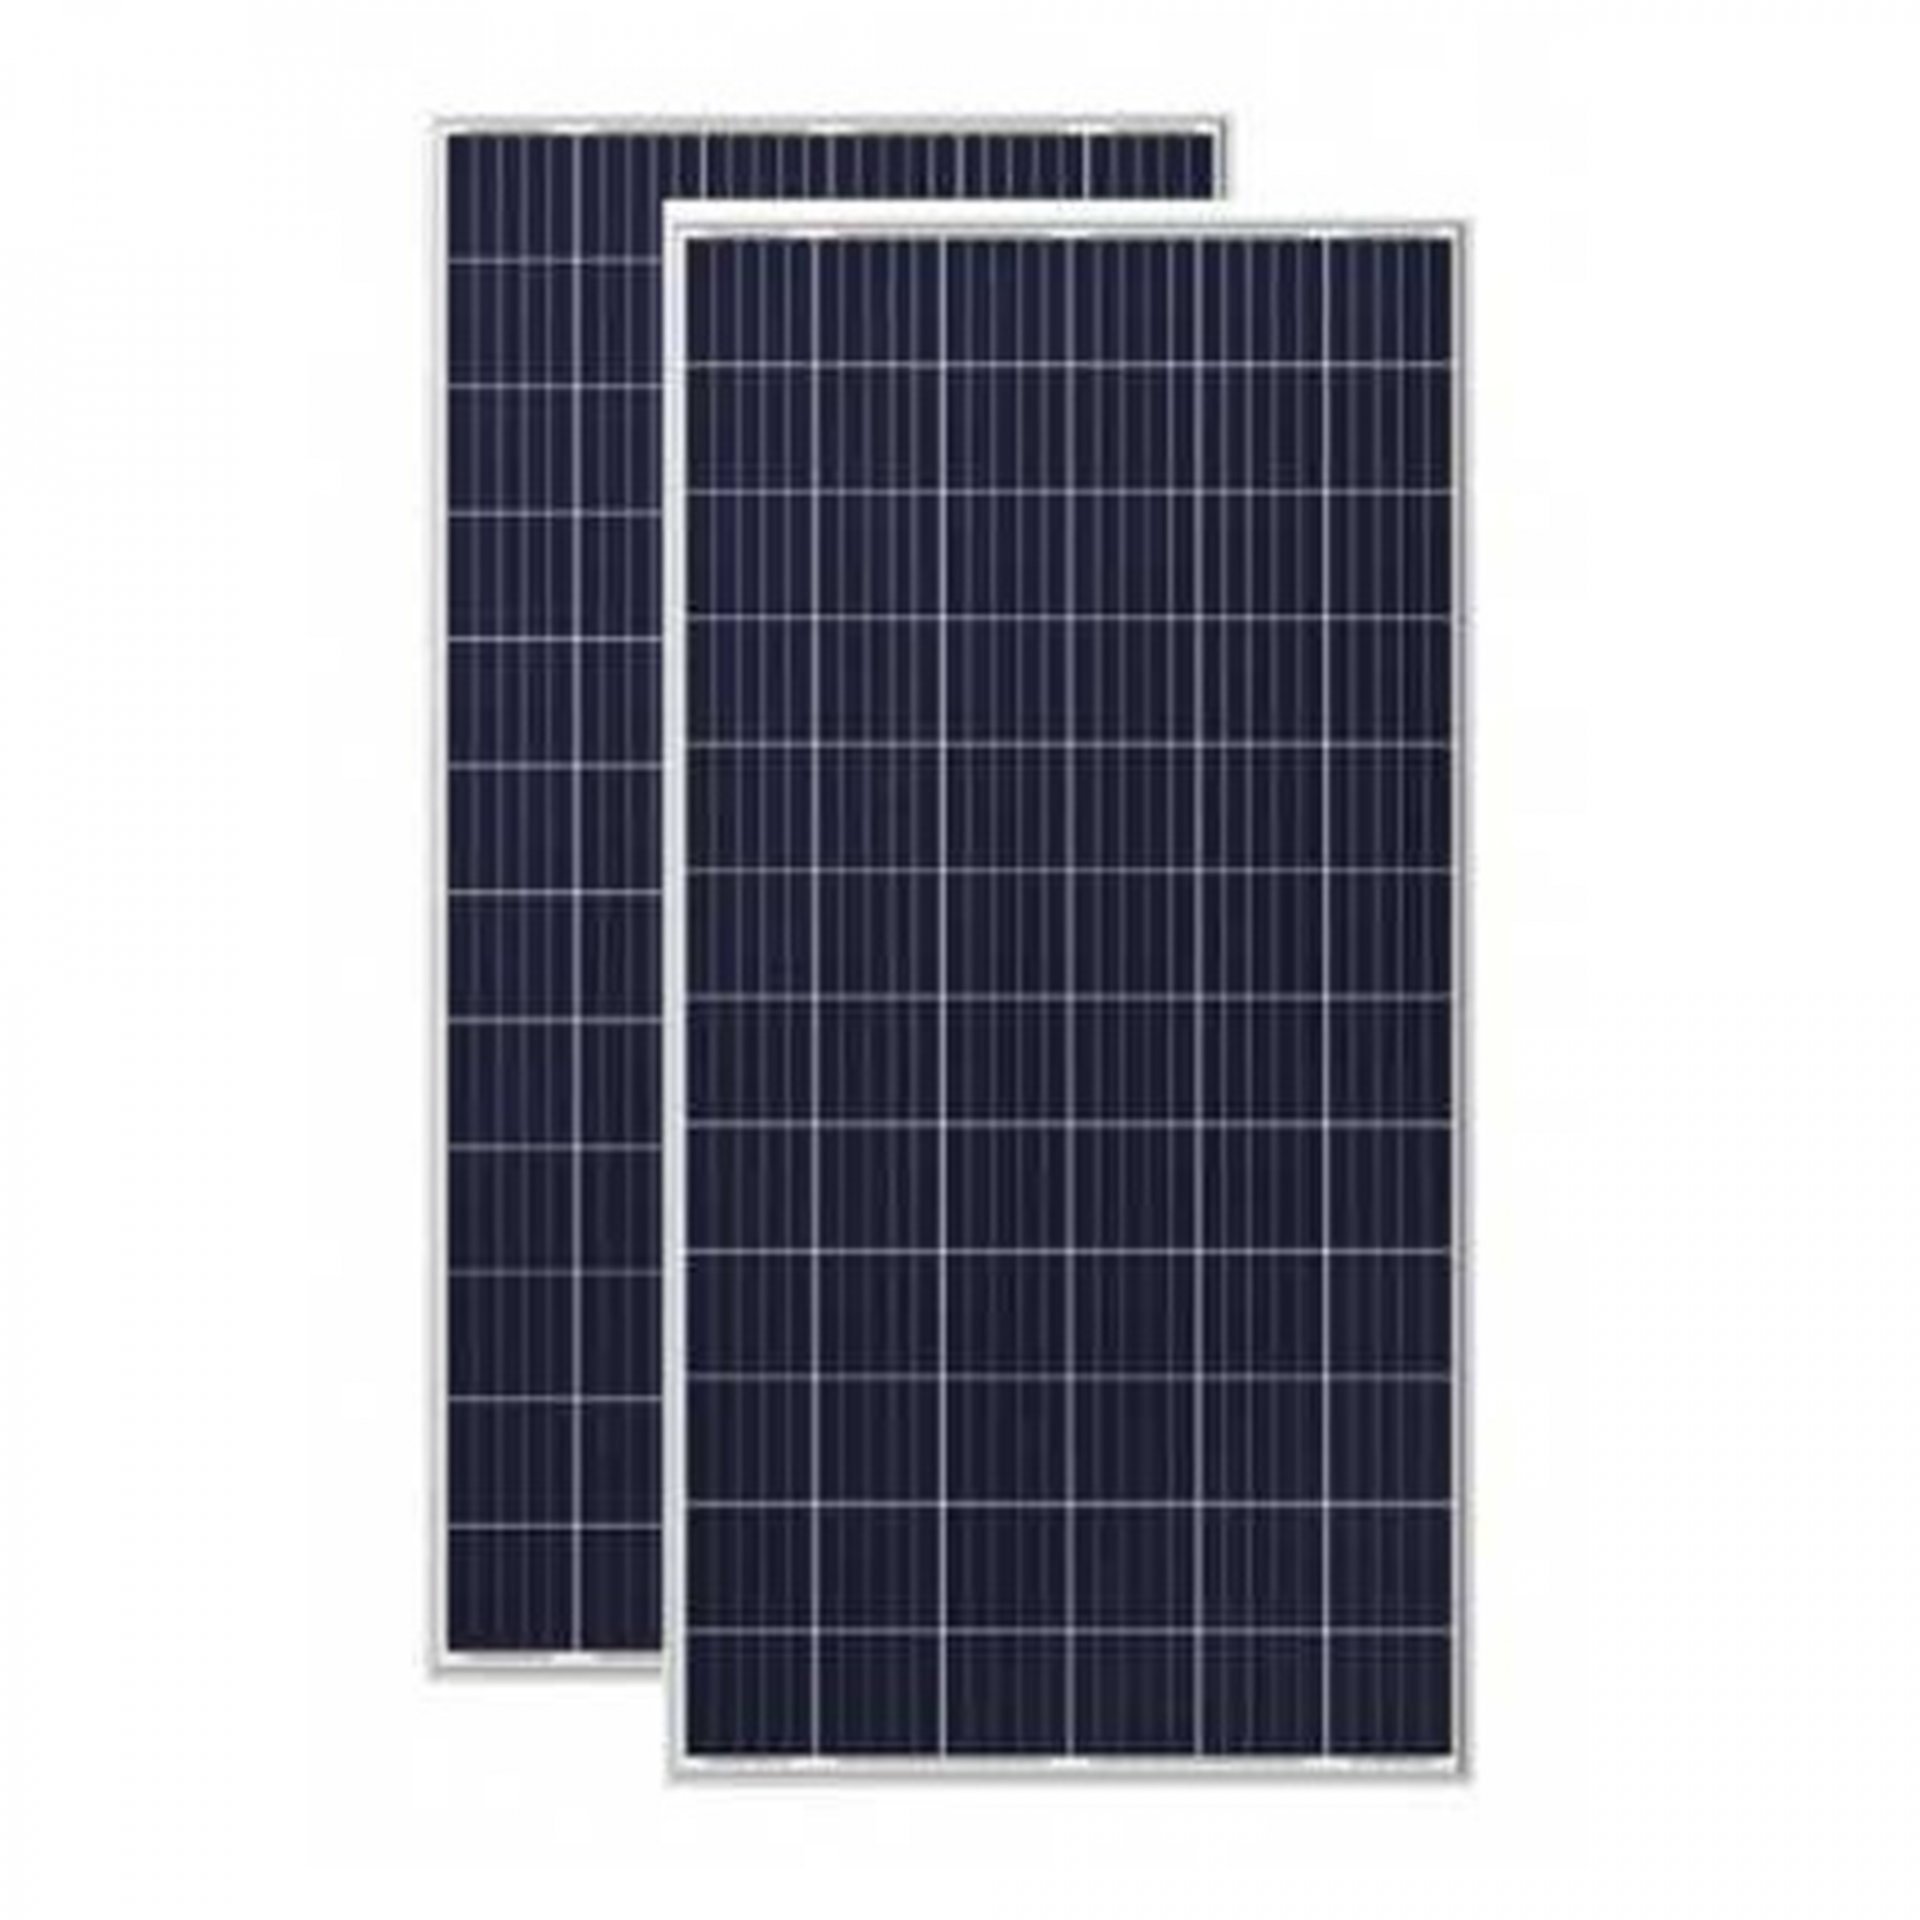 HS-320P Solar Cell Panels 320W Poly Cystaline